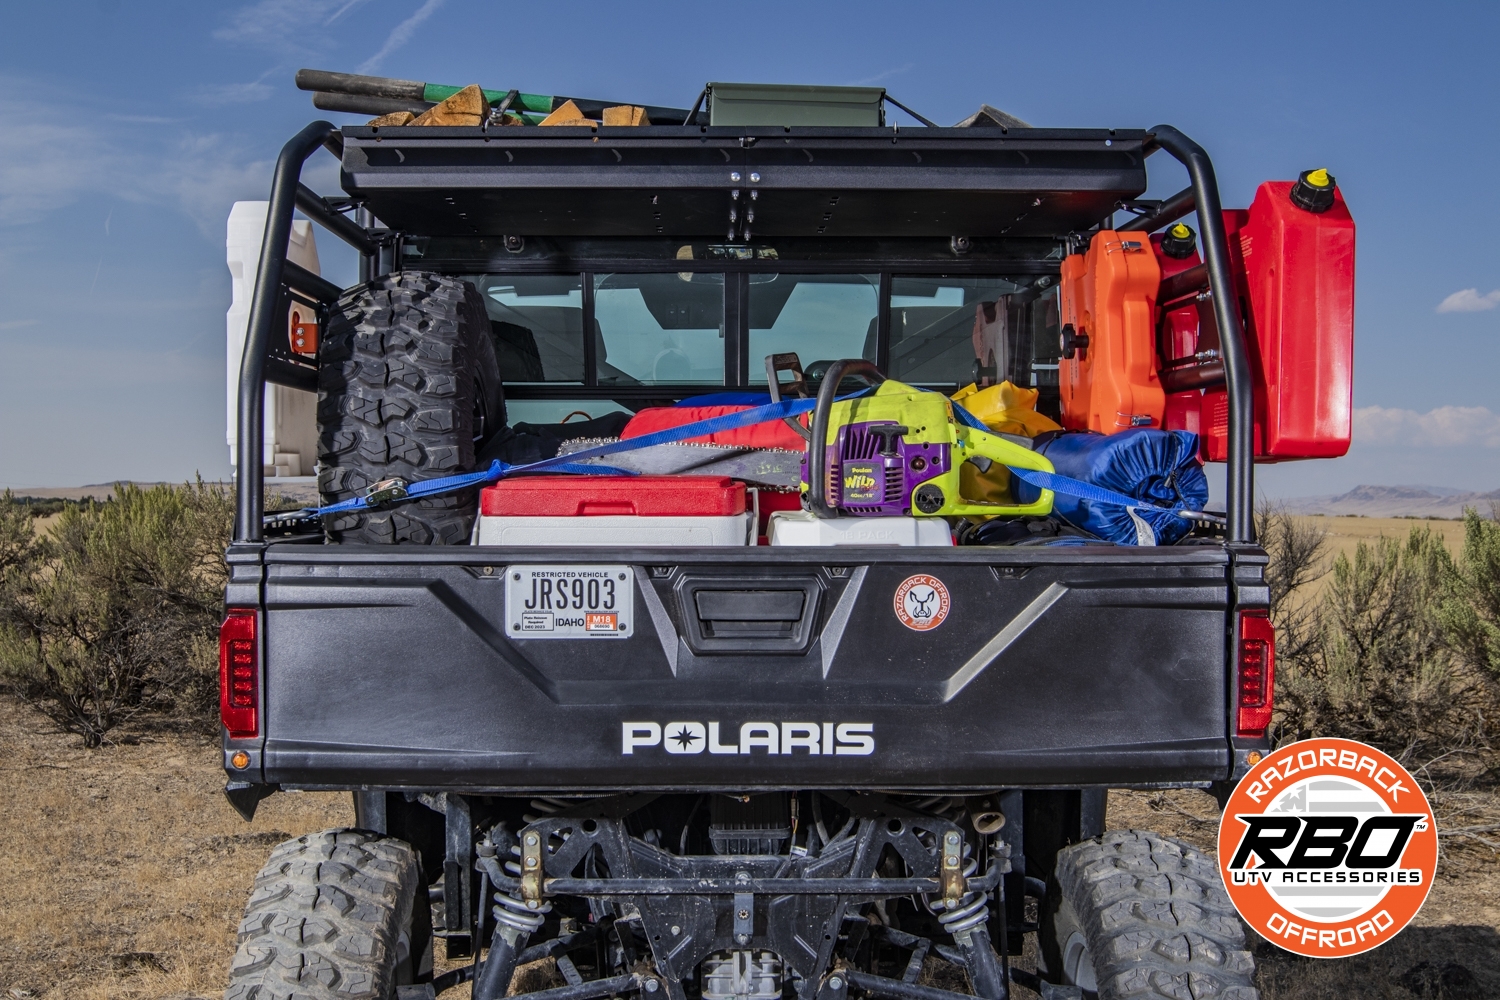 Fully Loaded Equipment and Tools in Polaris Ranger UTV and Side by Side Utility Rack